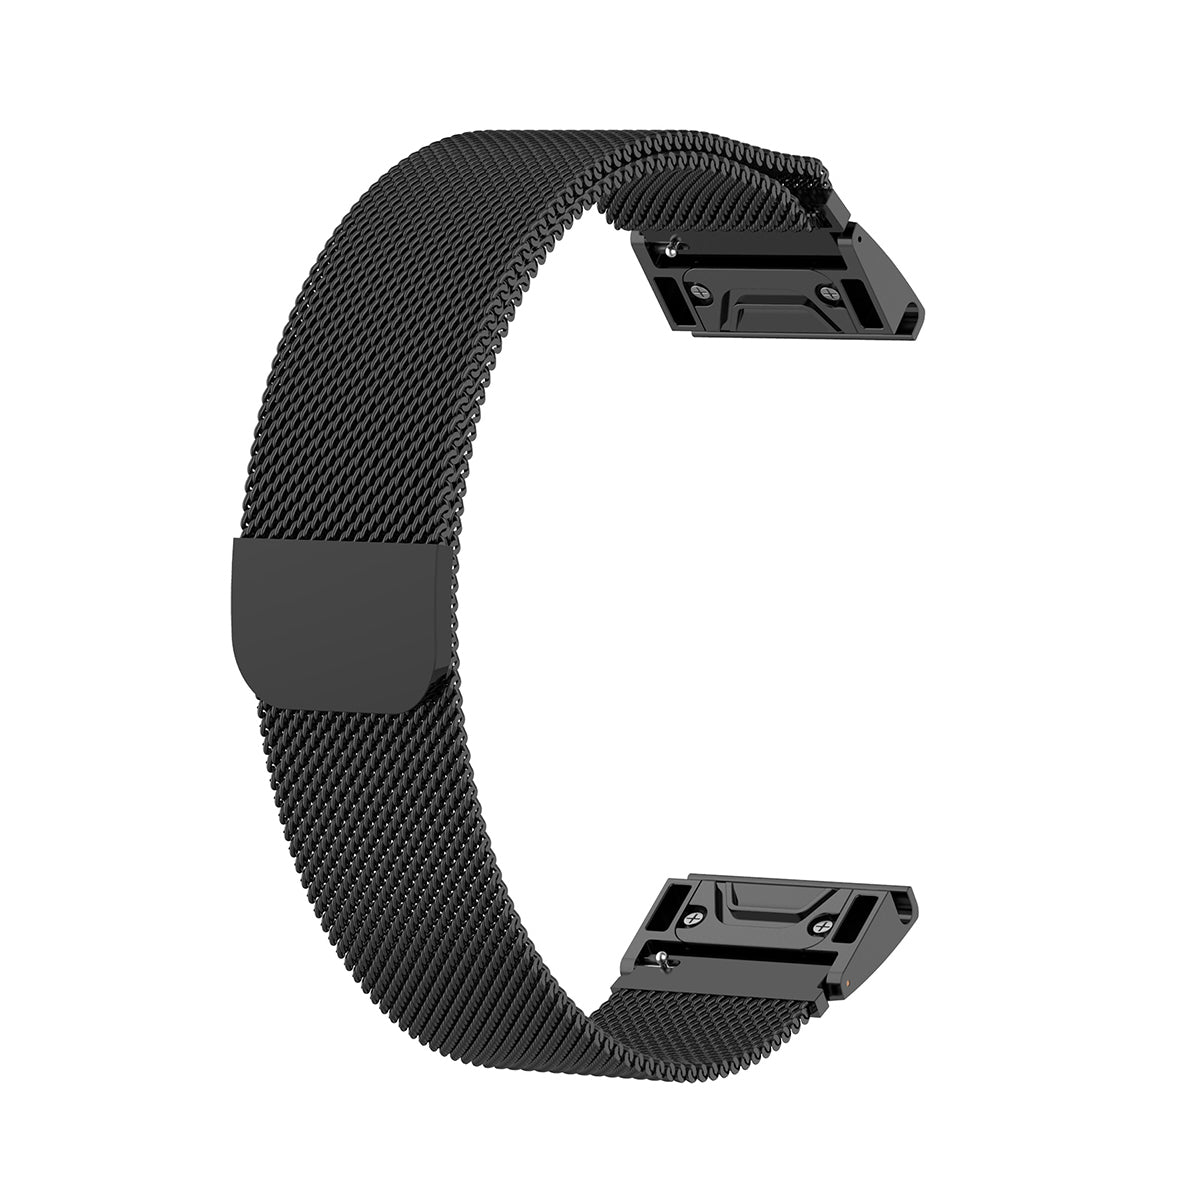 Milanese Garmin Fenix 5S Band Magnetic Lock with Quick Change (20mm) Black Night  